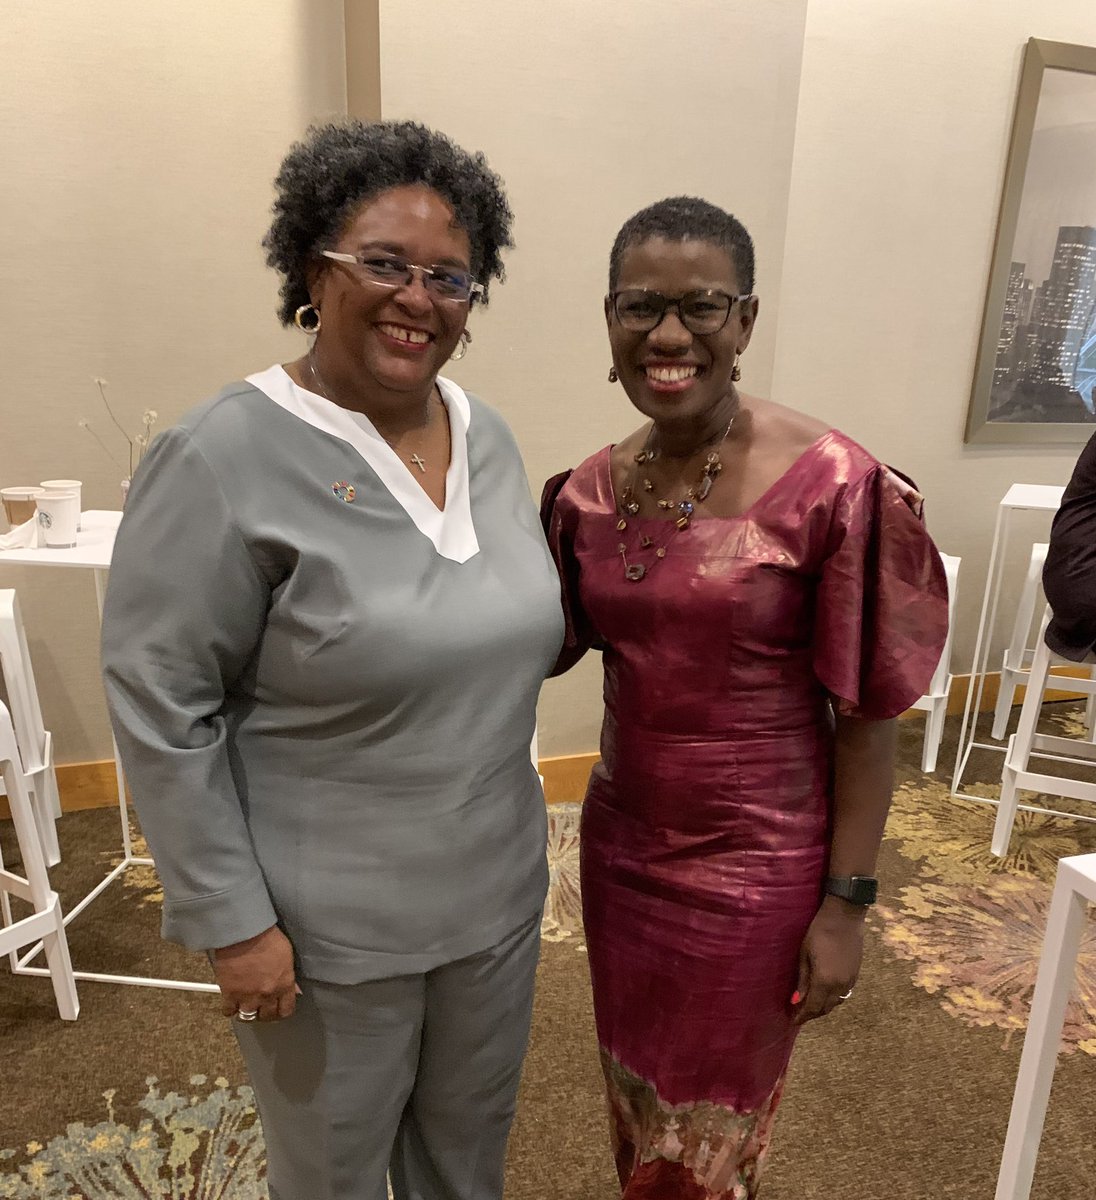 I spoke on a panel at the Global Africa Business Initiative @GlobalAfricaBiz event today. The speaker before my panel was one of my favorite leaders! The champion of equitable access to finance for developing countries, Barbados Prime Minister @miaamormottley.